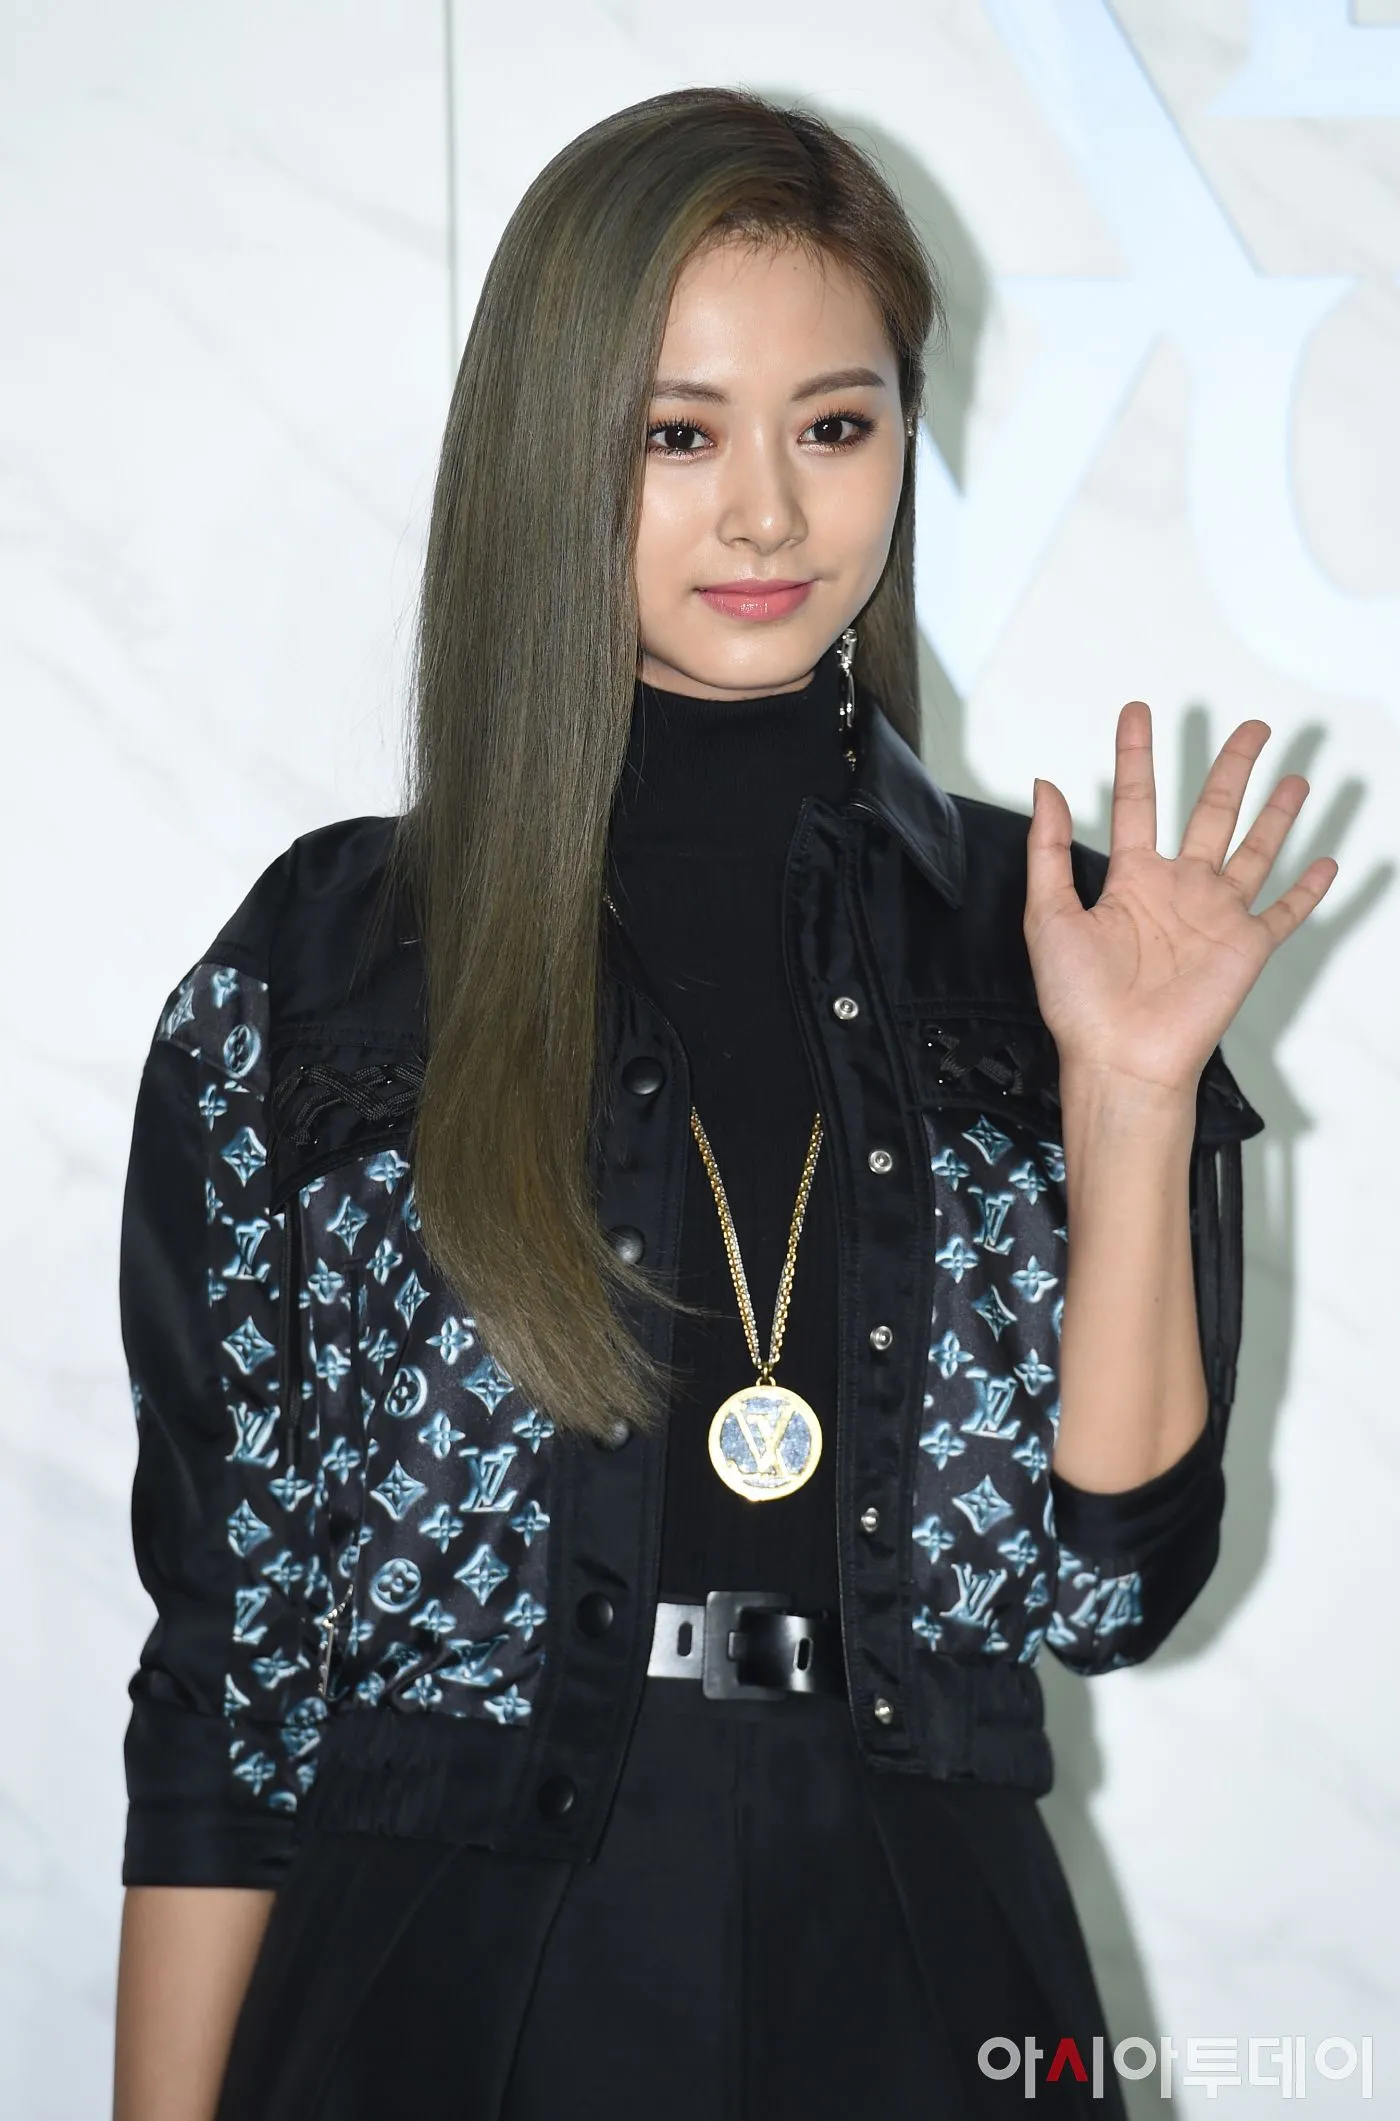 Tzuyu of TWICE attends a photo call of Louis Vuitton's Cruise 2020 News  Photo - Getty Images